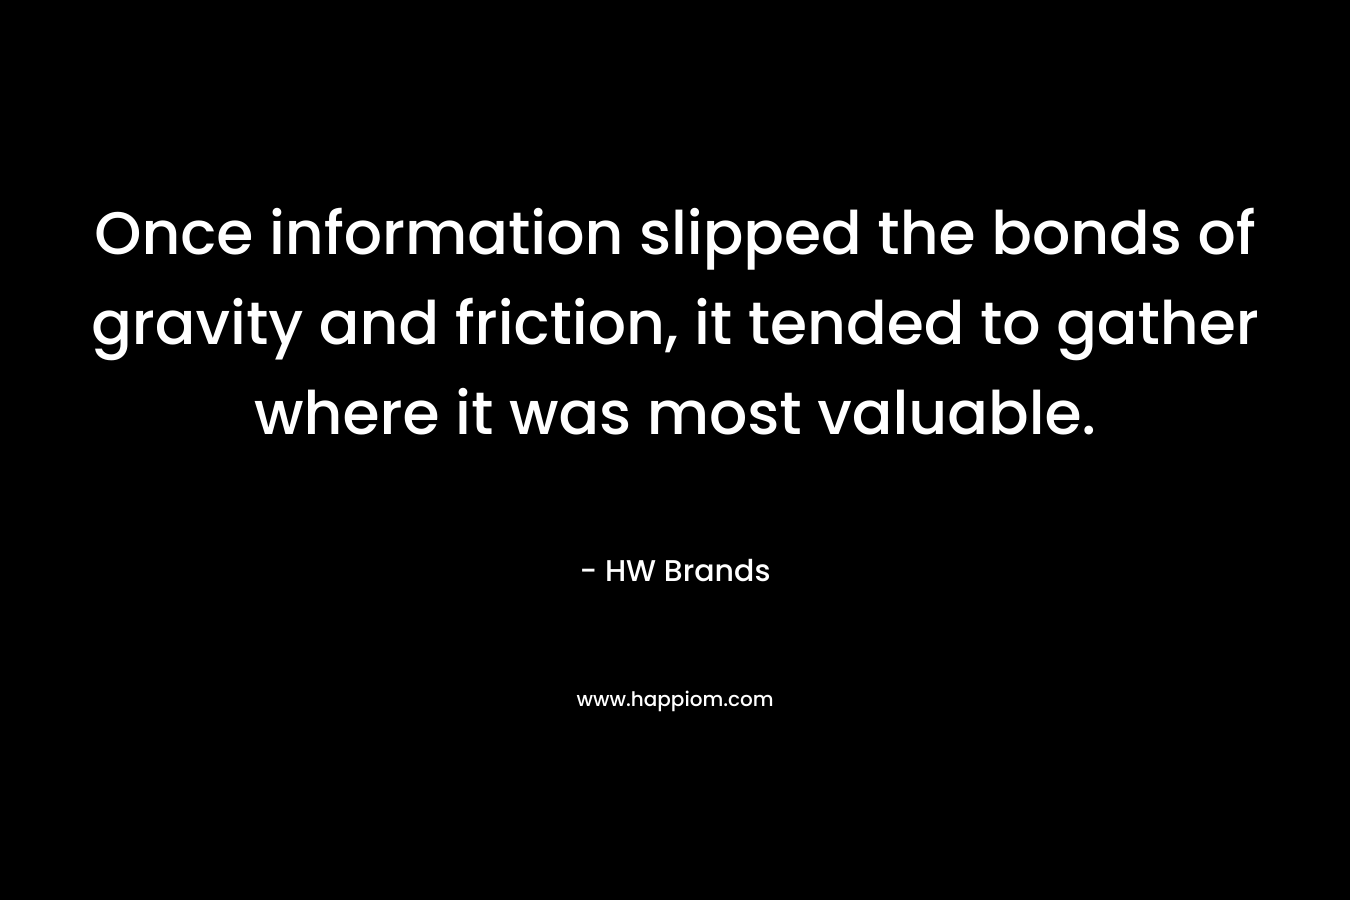 Once information slipped the bonds of gravity and friction, it tended to gather where it was most valuable. – HW Brands